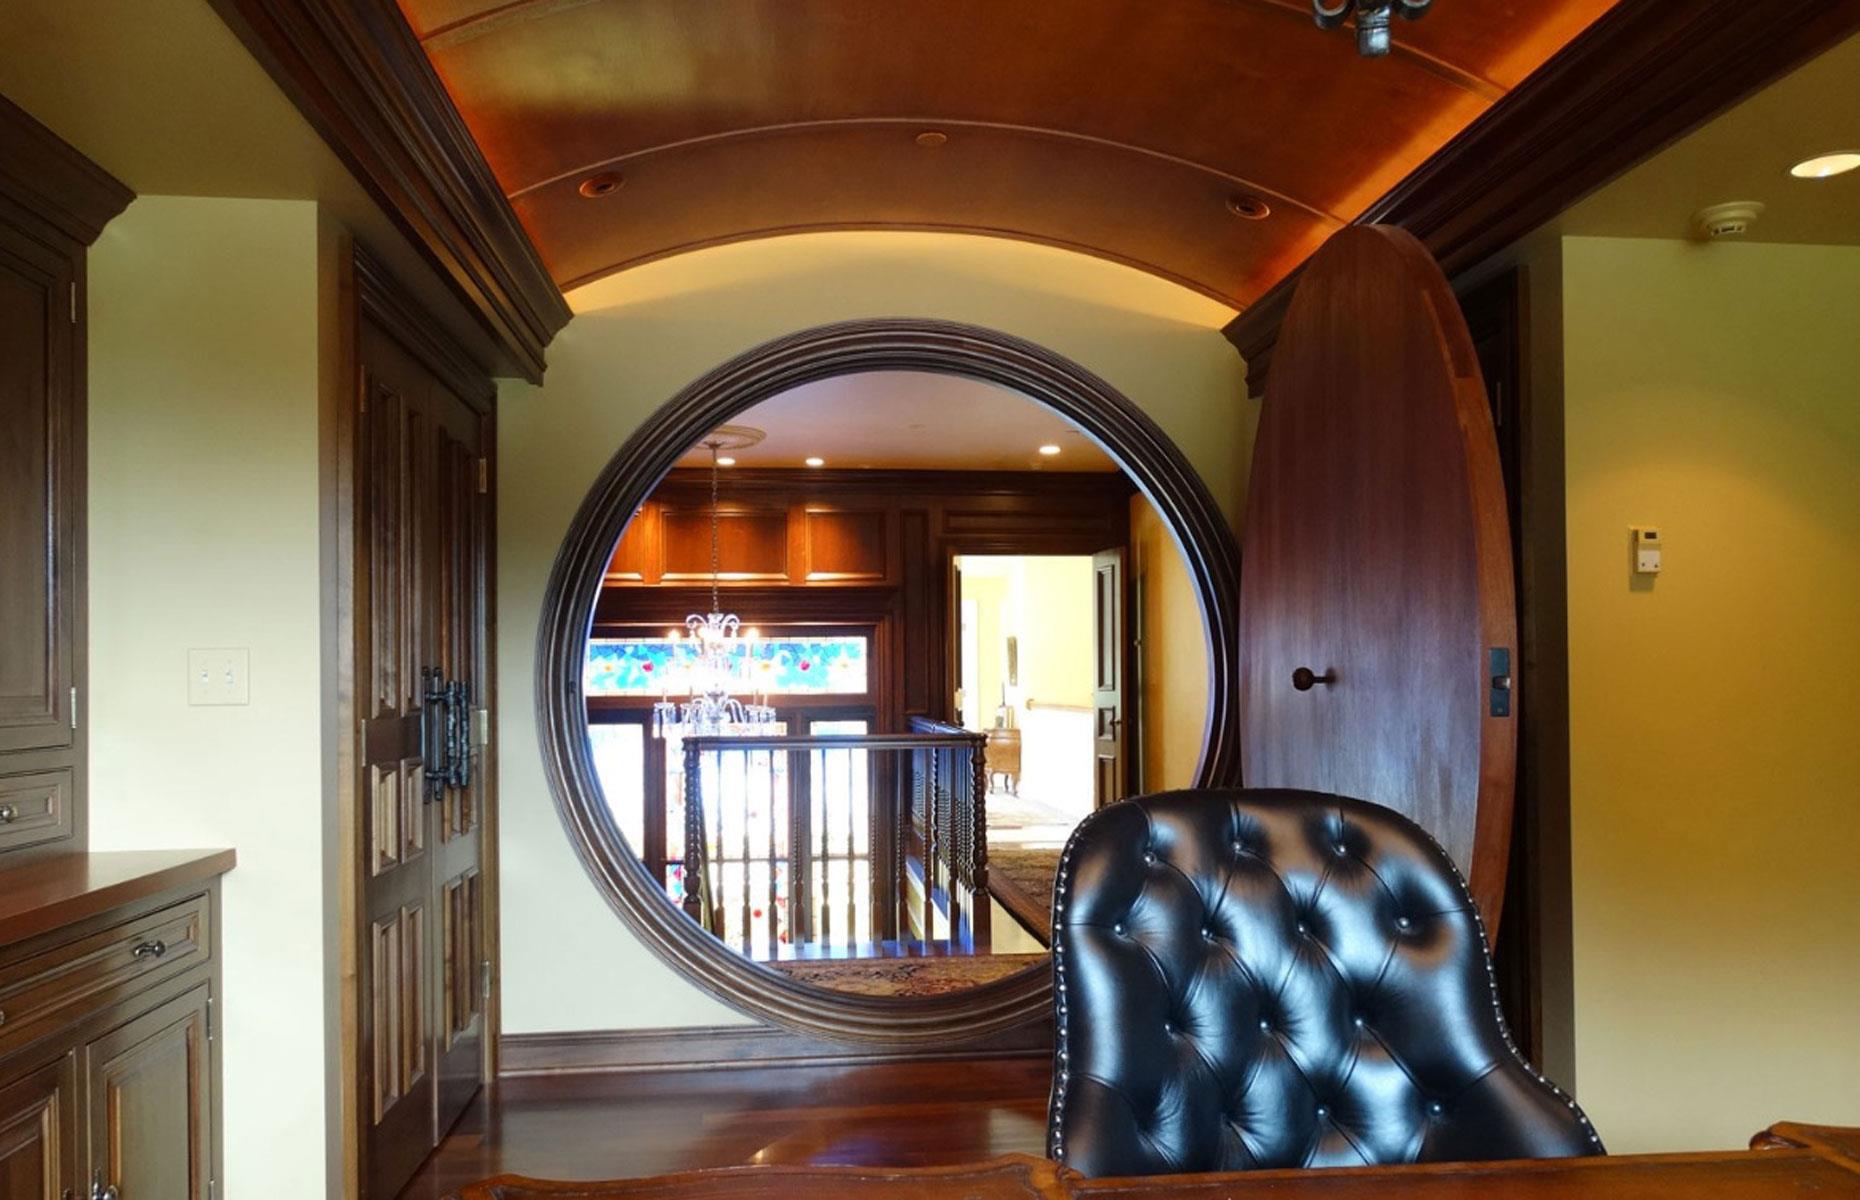 <p>A unique feature, the magnificent solid wooden hidden door was commissioned by the former owner, a diehard Tolkien fan, who spent a fortune having it custom-made and installed in the luxurious mansion to resemble a <a href="https://www.loveproperty.com/gallerylist/62633/real-life-hobbit-homes-that-put-the-shire-to-shame">real-life hobbit home</a>. </p>